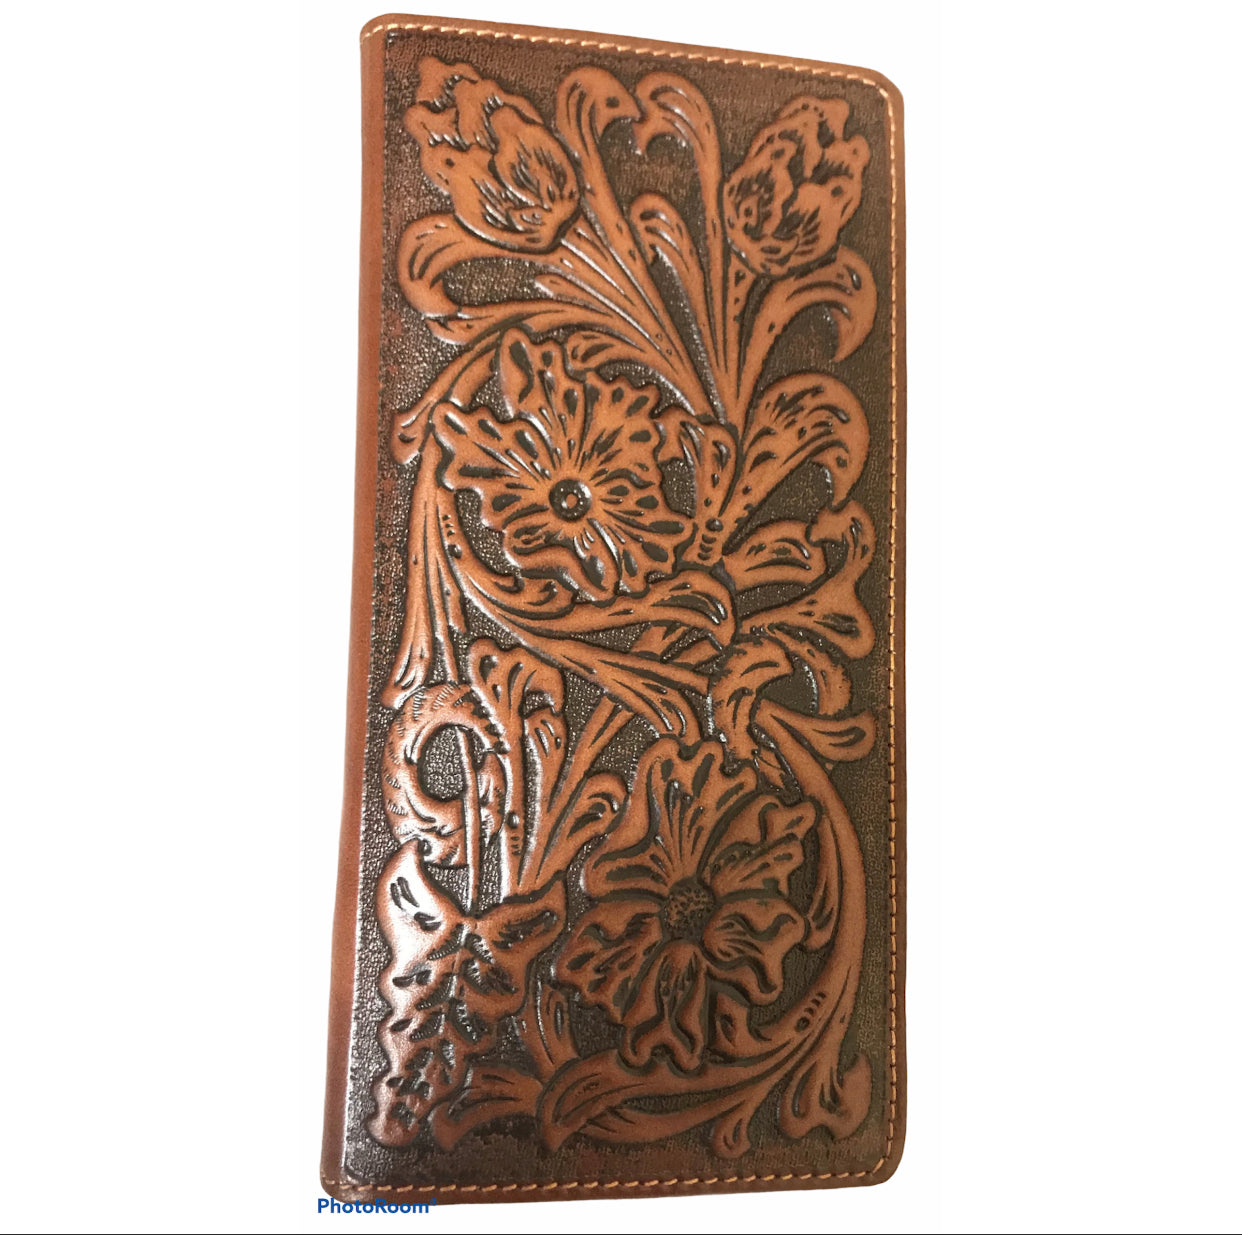 MWLW006 Genuine Tooled Leather Collection Men's Wallet - Rawhide Western Wear 